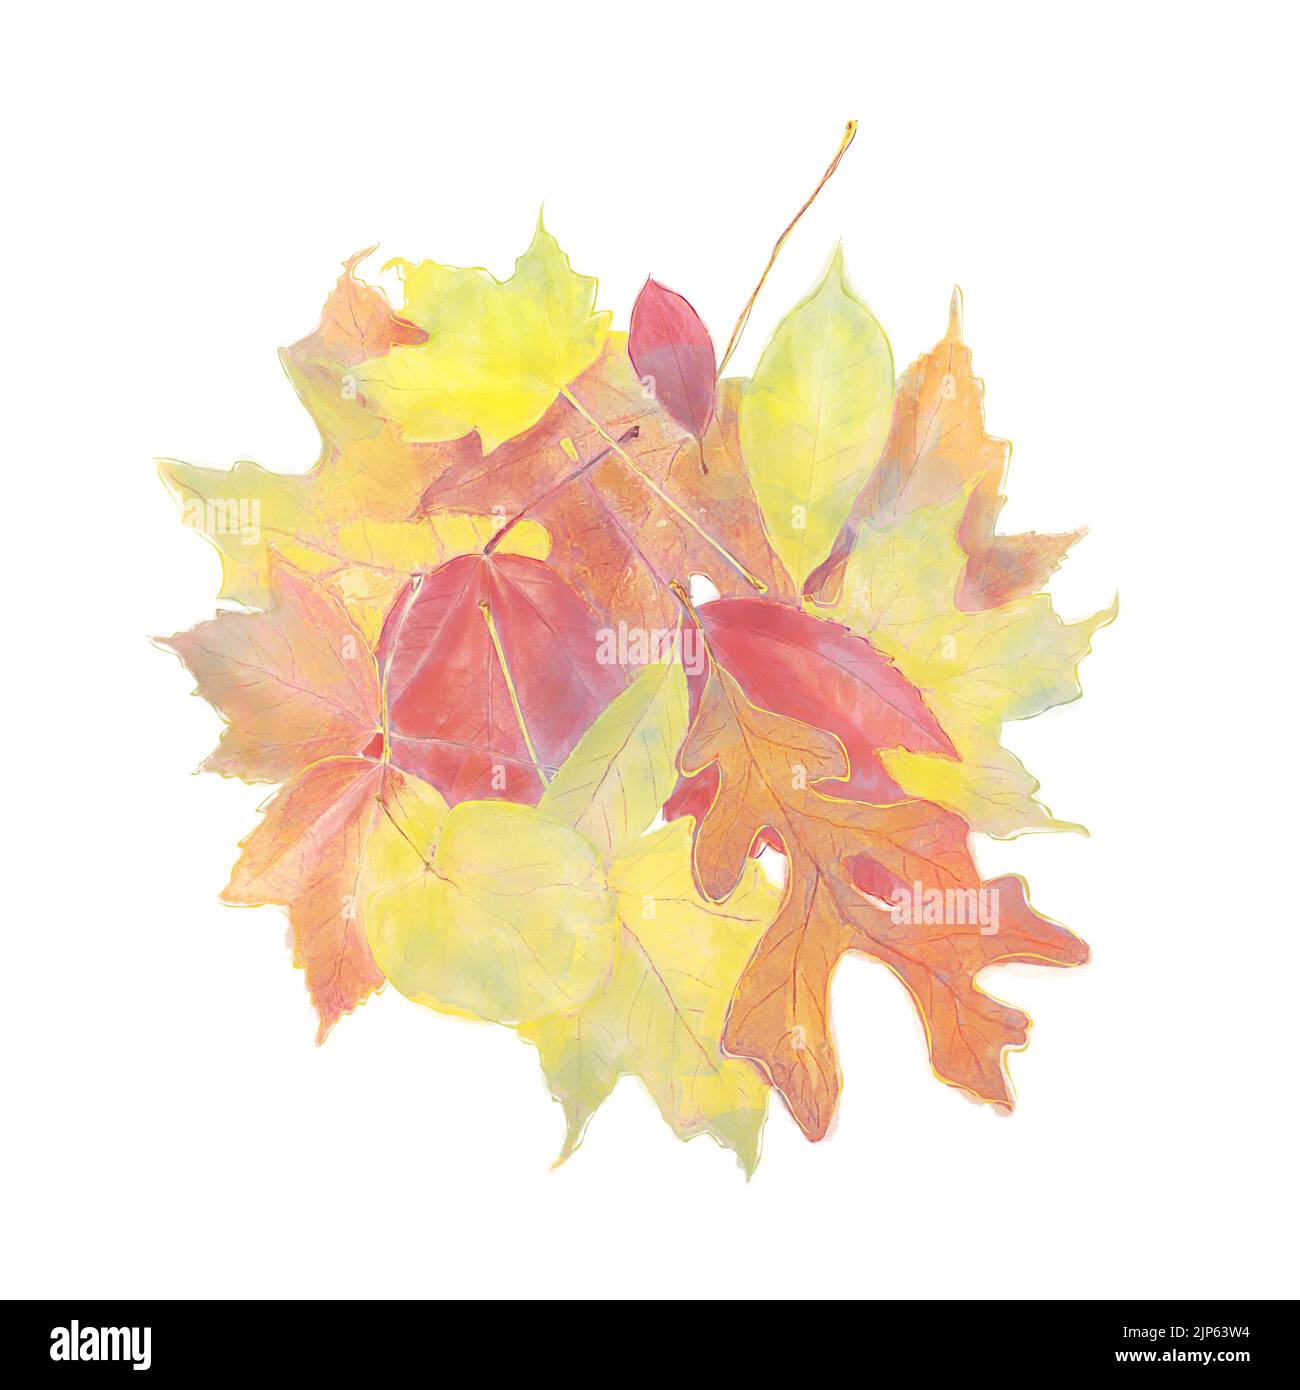 Watercolor Image of Colorful Autumn Leaves isolated on white background Stock Photo